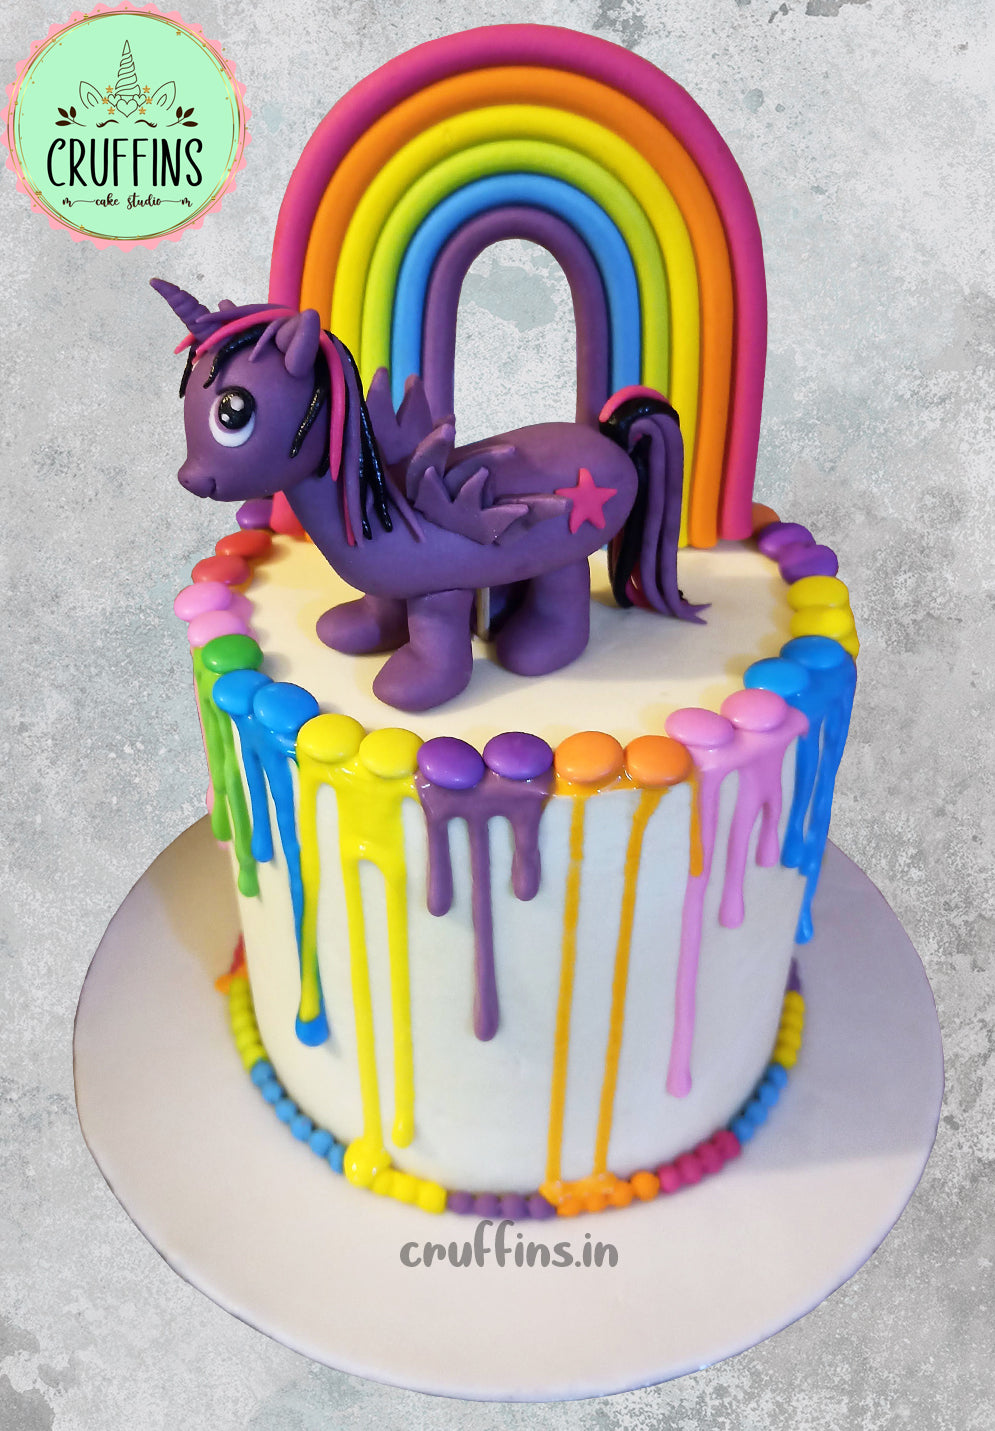 MY LITTLE PONY Edible Cake topper Party image Decoration | eBay